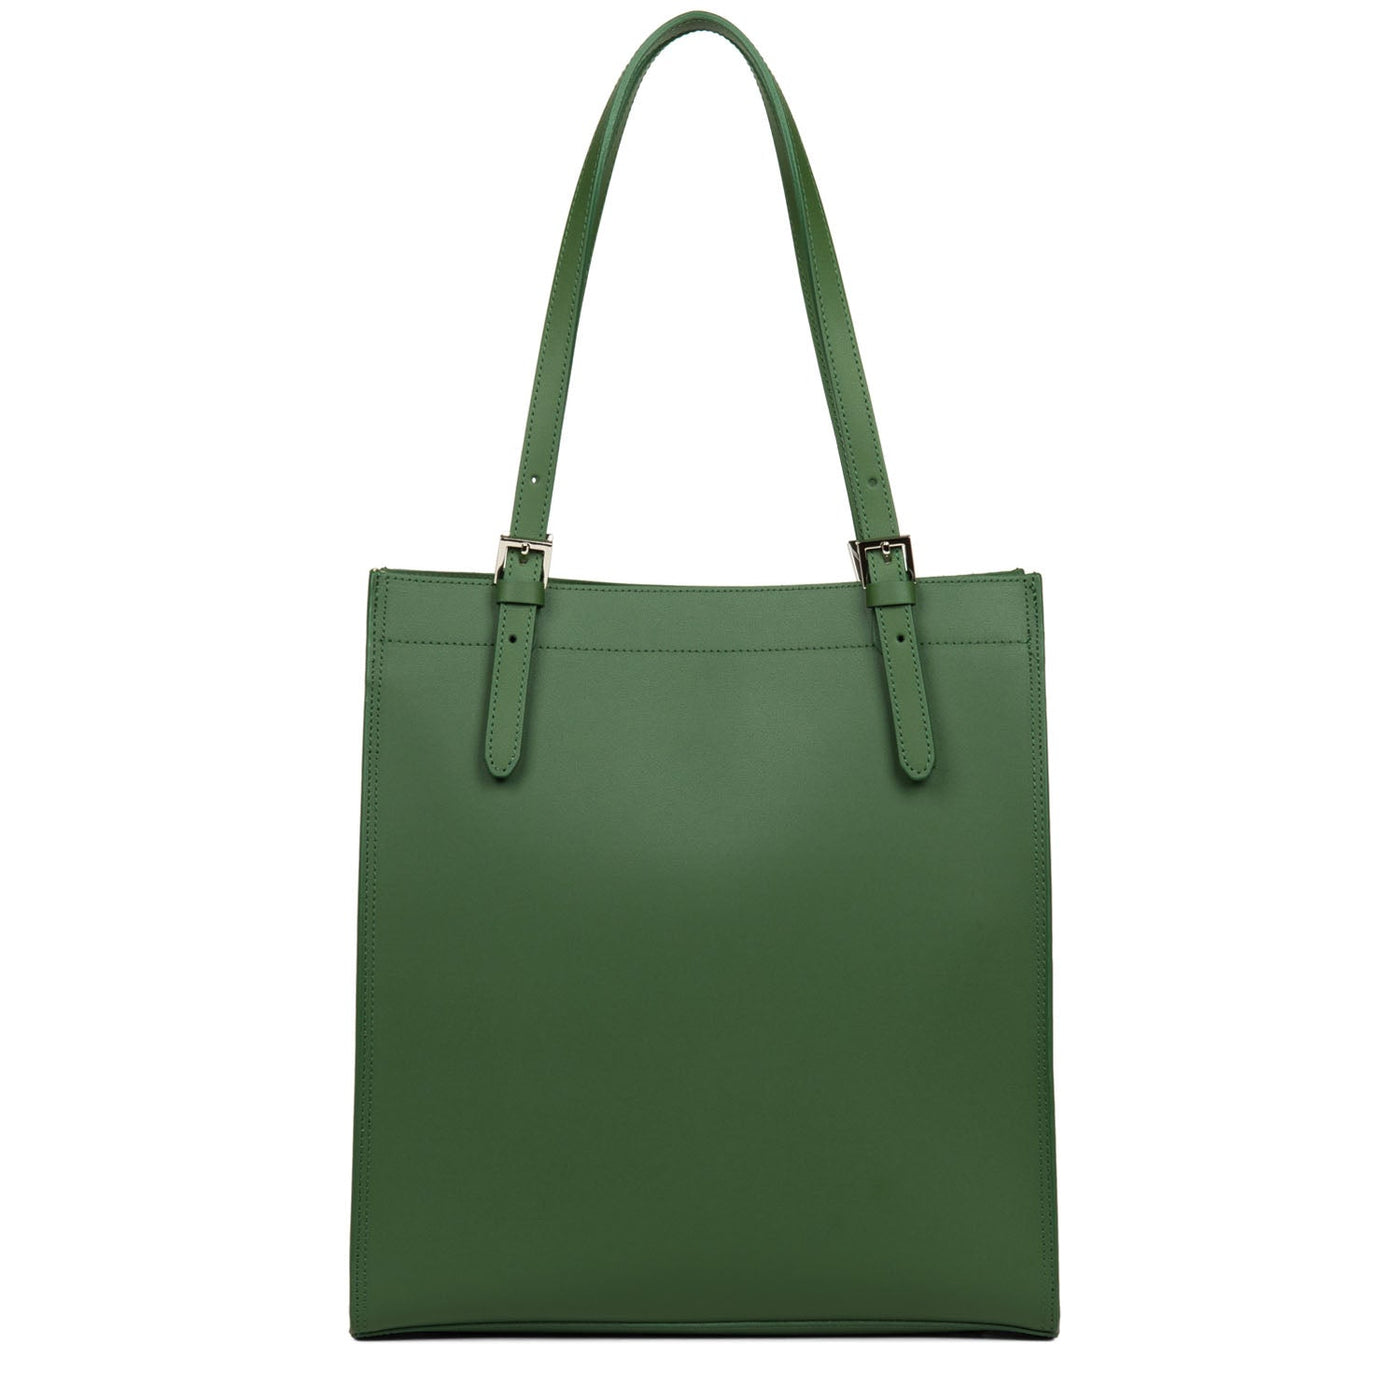 tote bag - pur & element city #couleur_vert-pin-in-champagne